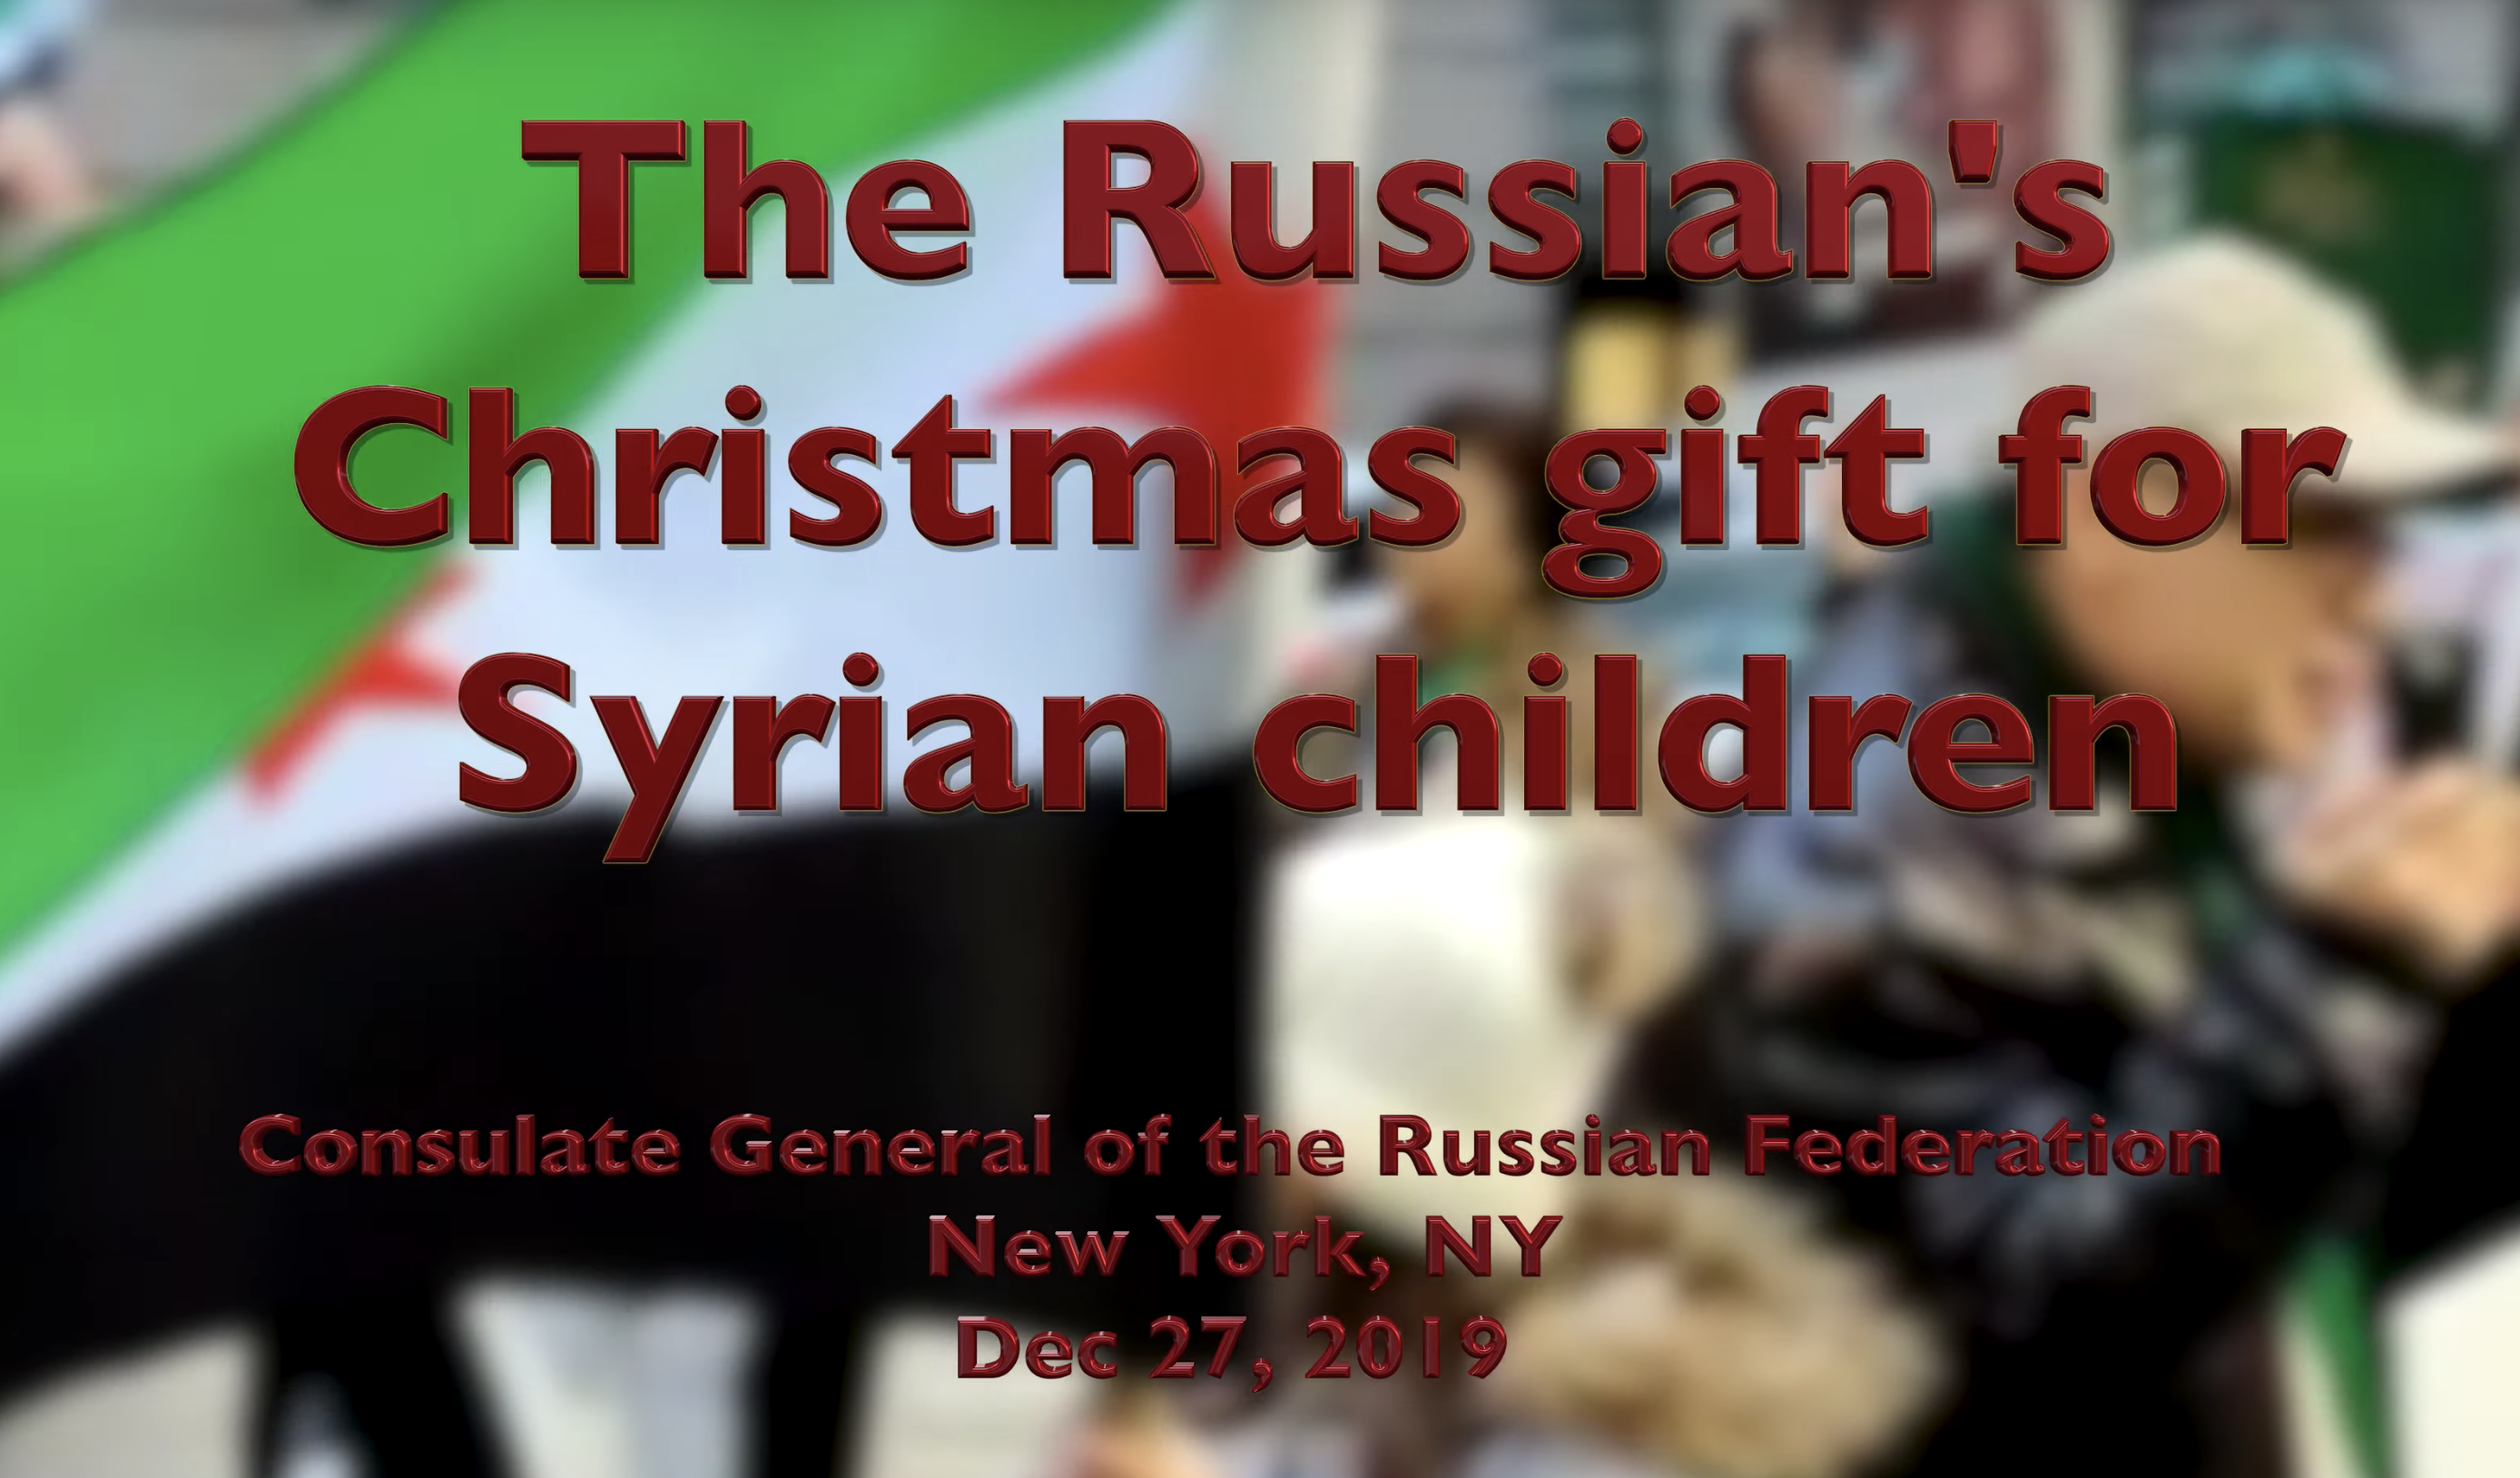 The Russian’s Christmas gift for Syrian children